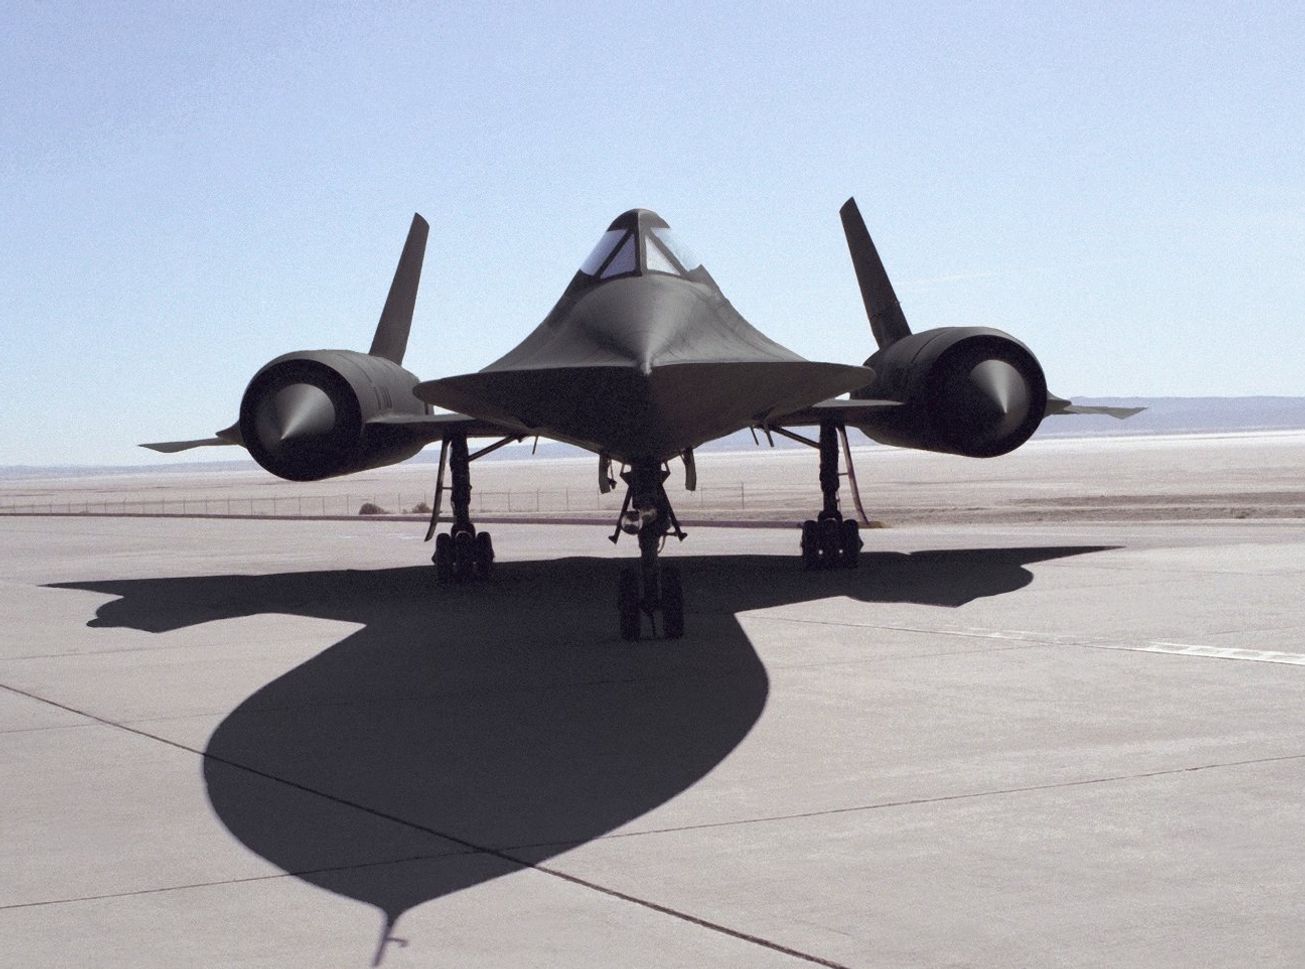 World Record Why the SR71 Blackbird Is Still the Fastest Plane The